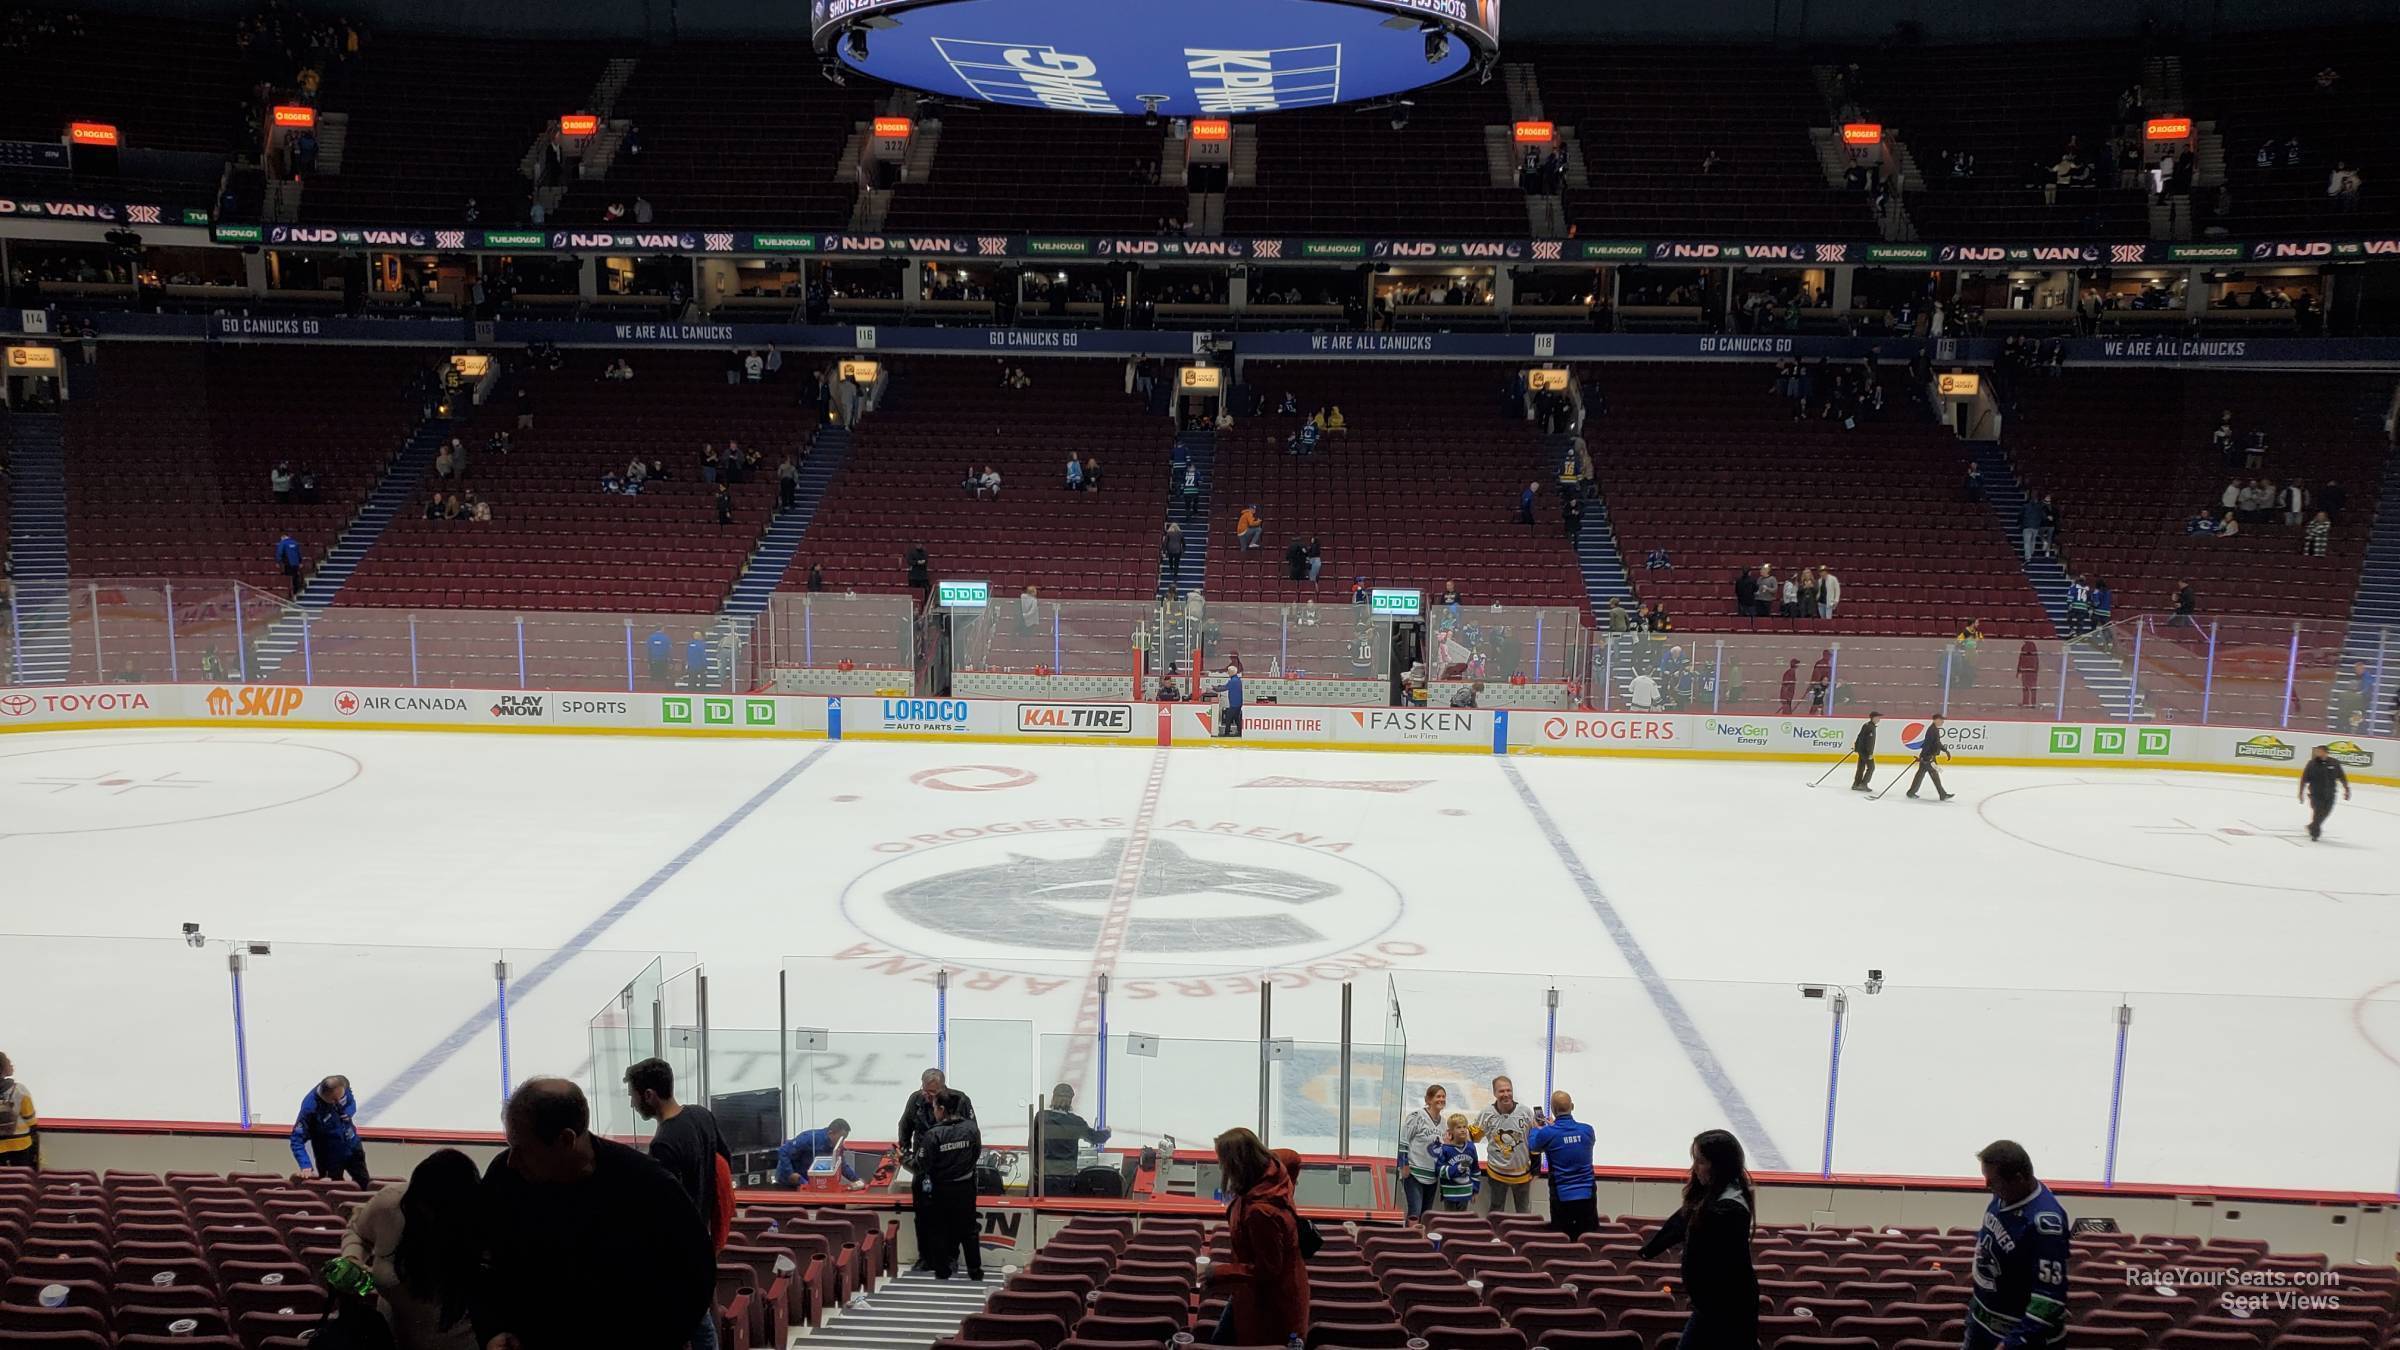 section 106, row 20 seat view  for hockey - rogers arena